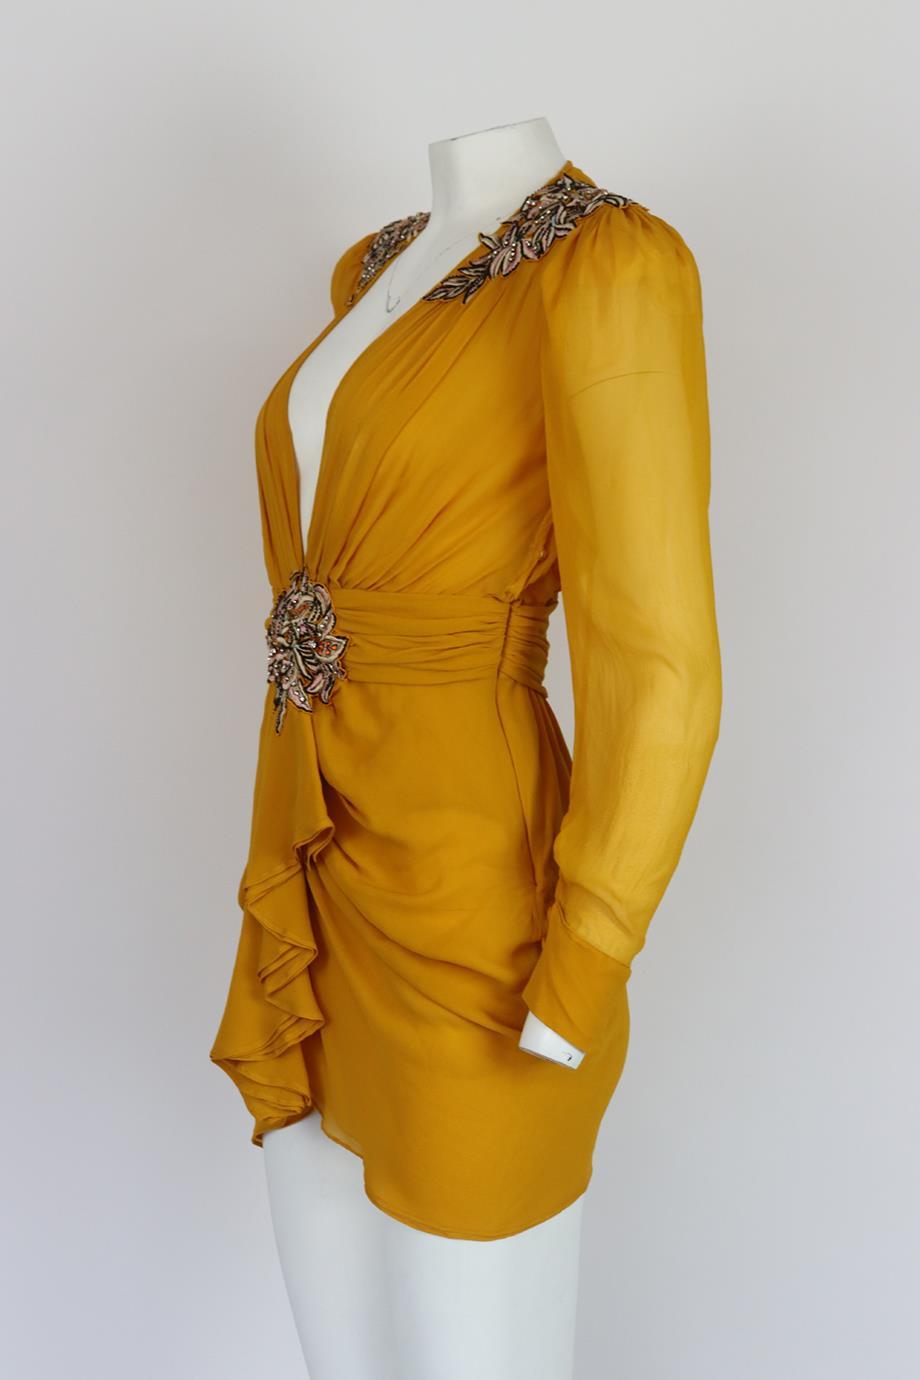 Dundas embroidered chiffon mini dress. Yellow. Long sleeve, v-neck. Zip fastening at back. 100% silk; fabric2: 100% polyamide. Size: IT 42 (UK 10, US 6, FR 38). Bust: 34 in. Waist: 26 in. Hips: 31 in. Length: 31.4 in. New with tags